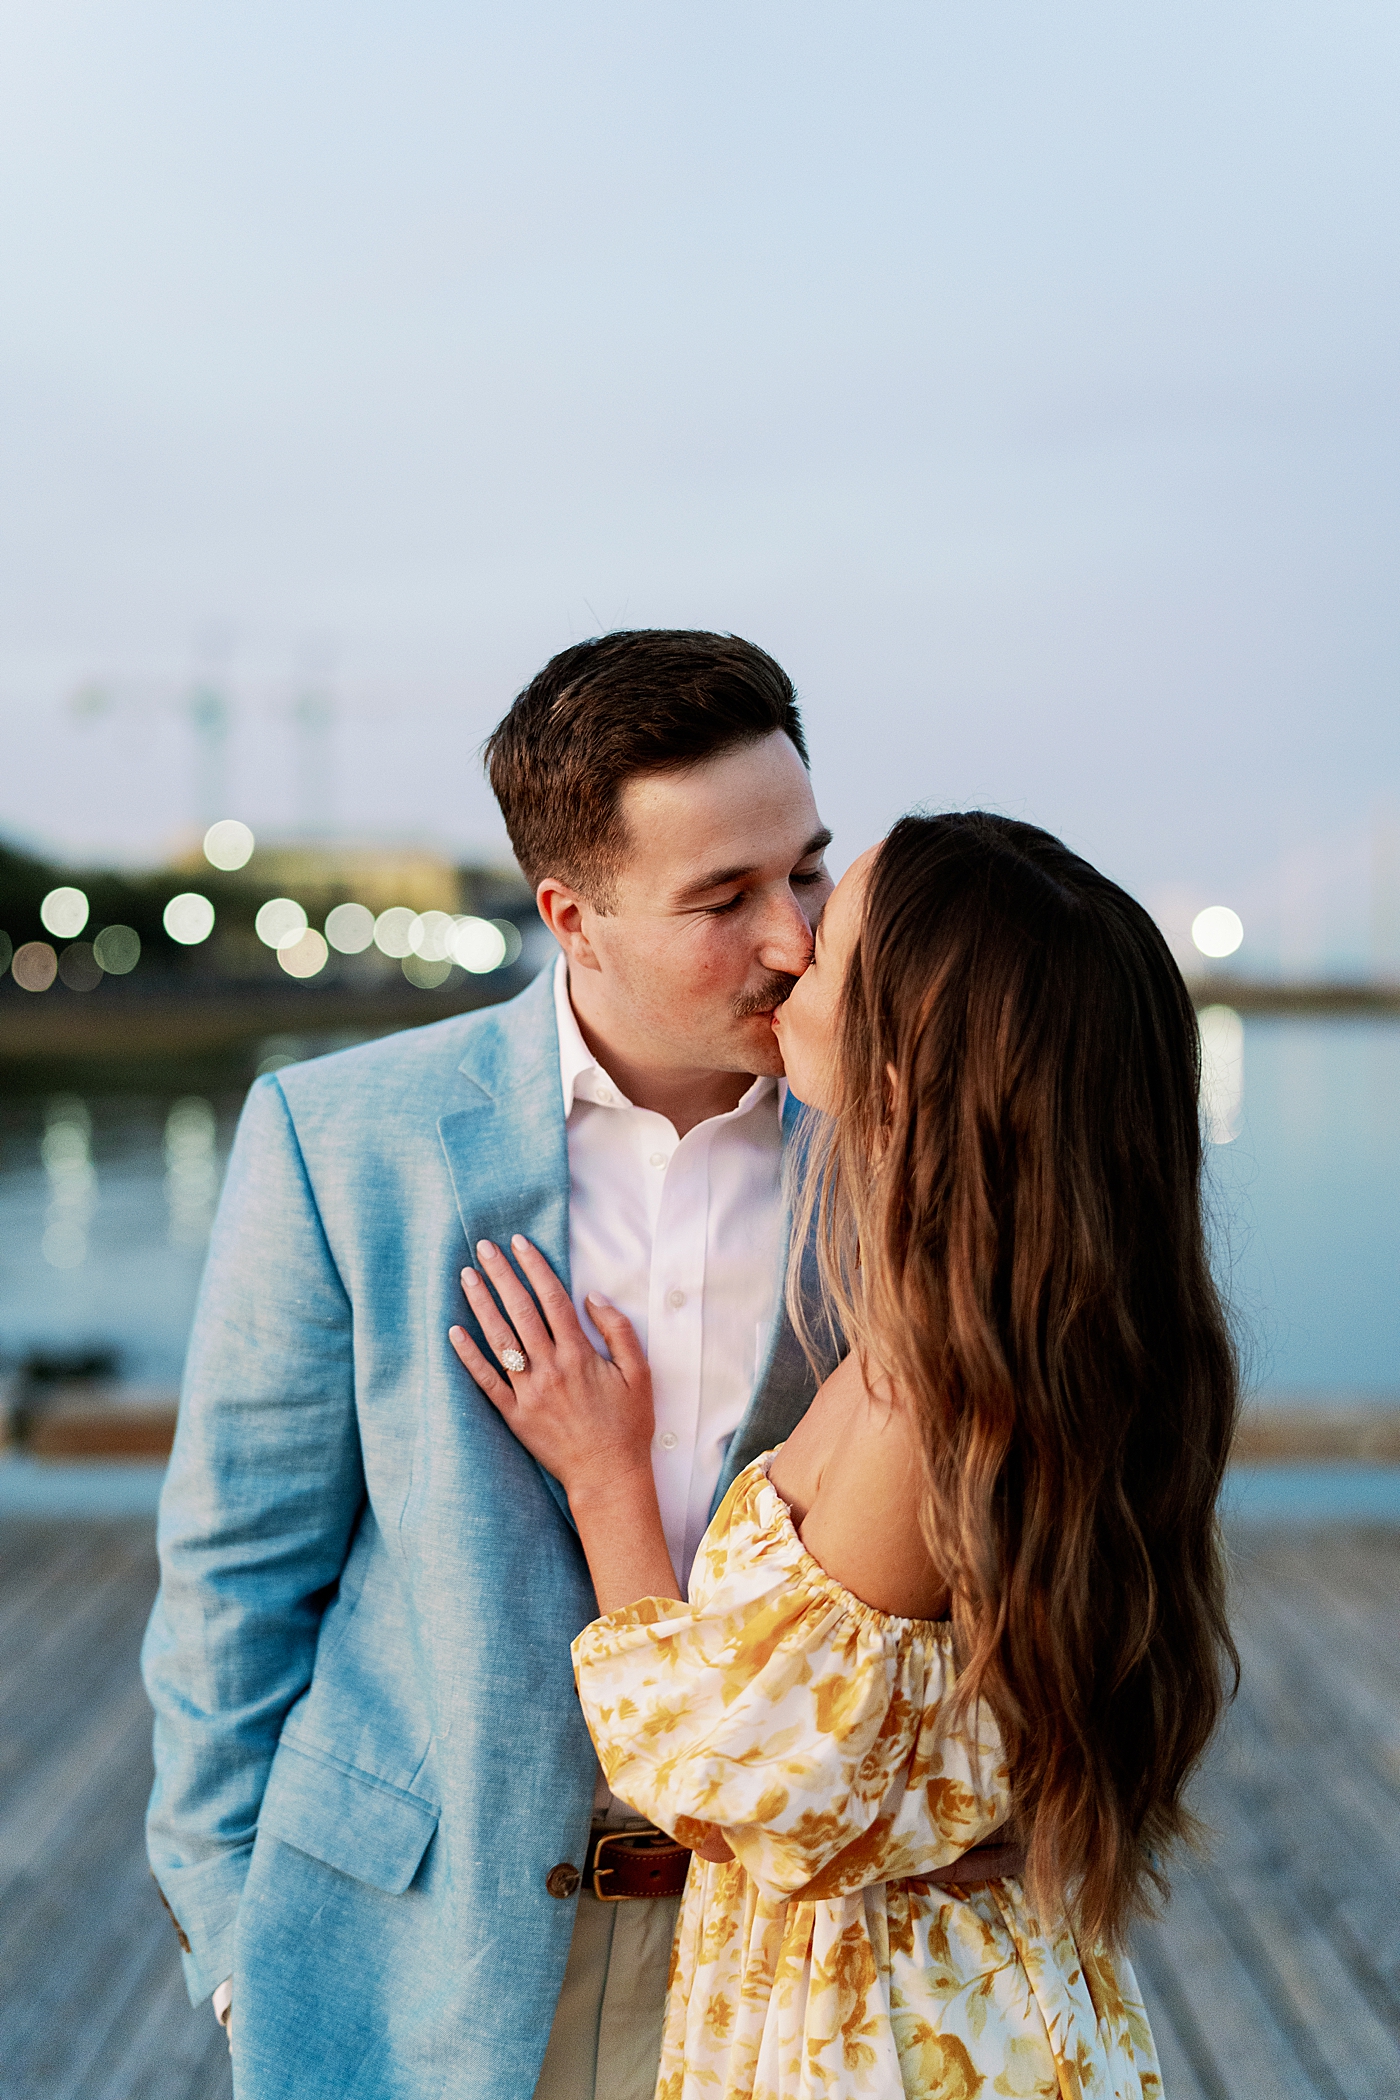 during their Charleston engagement session | Image by Annie Laura Photo